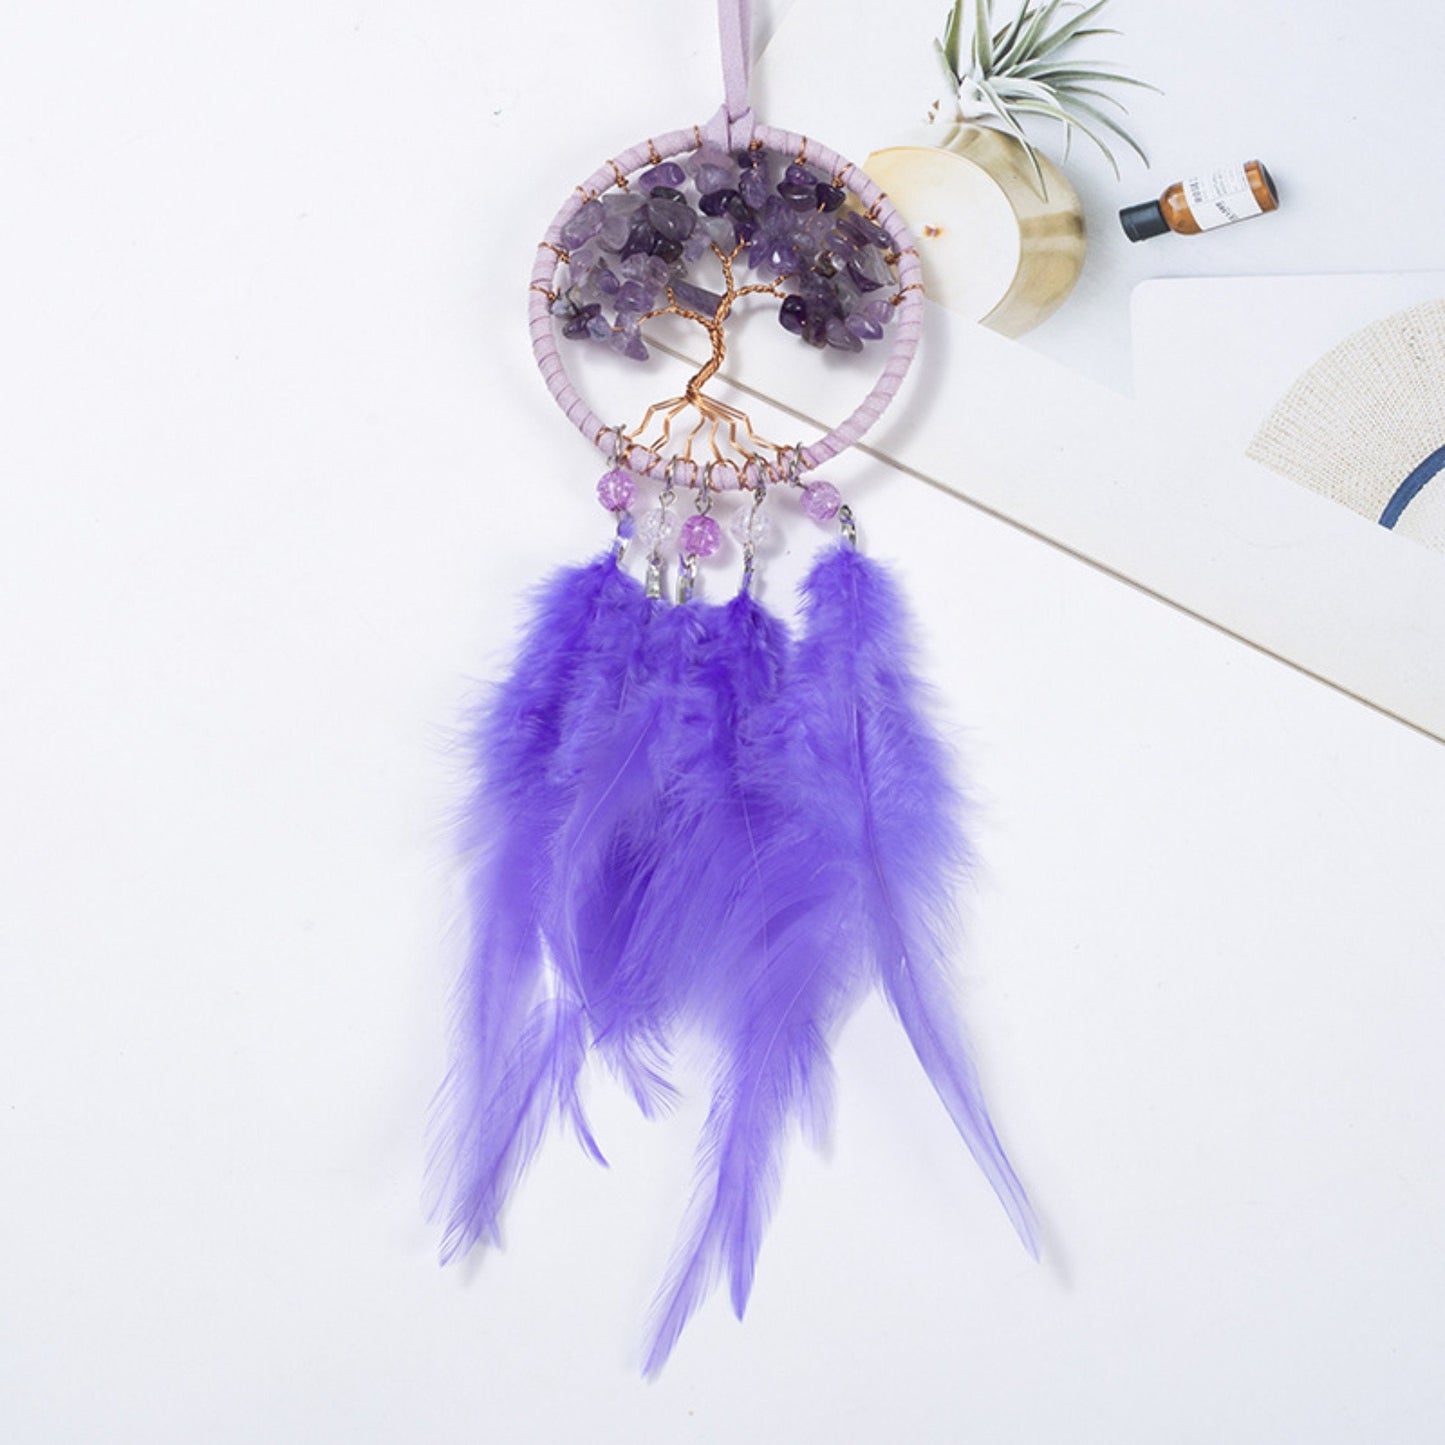 Handmade Purple Tree of Life Dreamcatcher with Purple Feathers - Amethyst Stones -- Rearview Mirror Hanging or Wall Hanging -- Quick Ship!